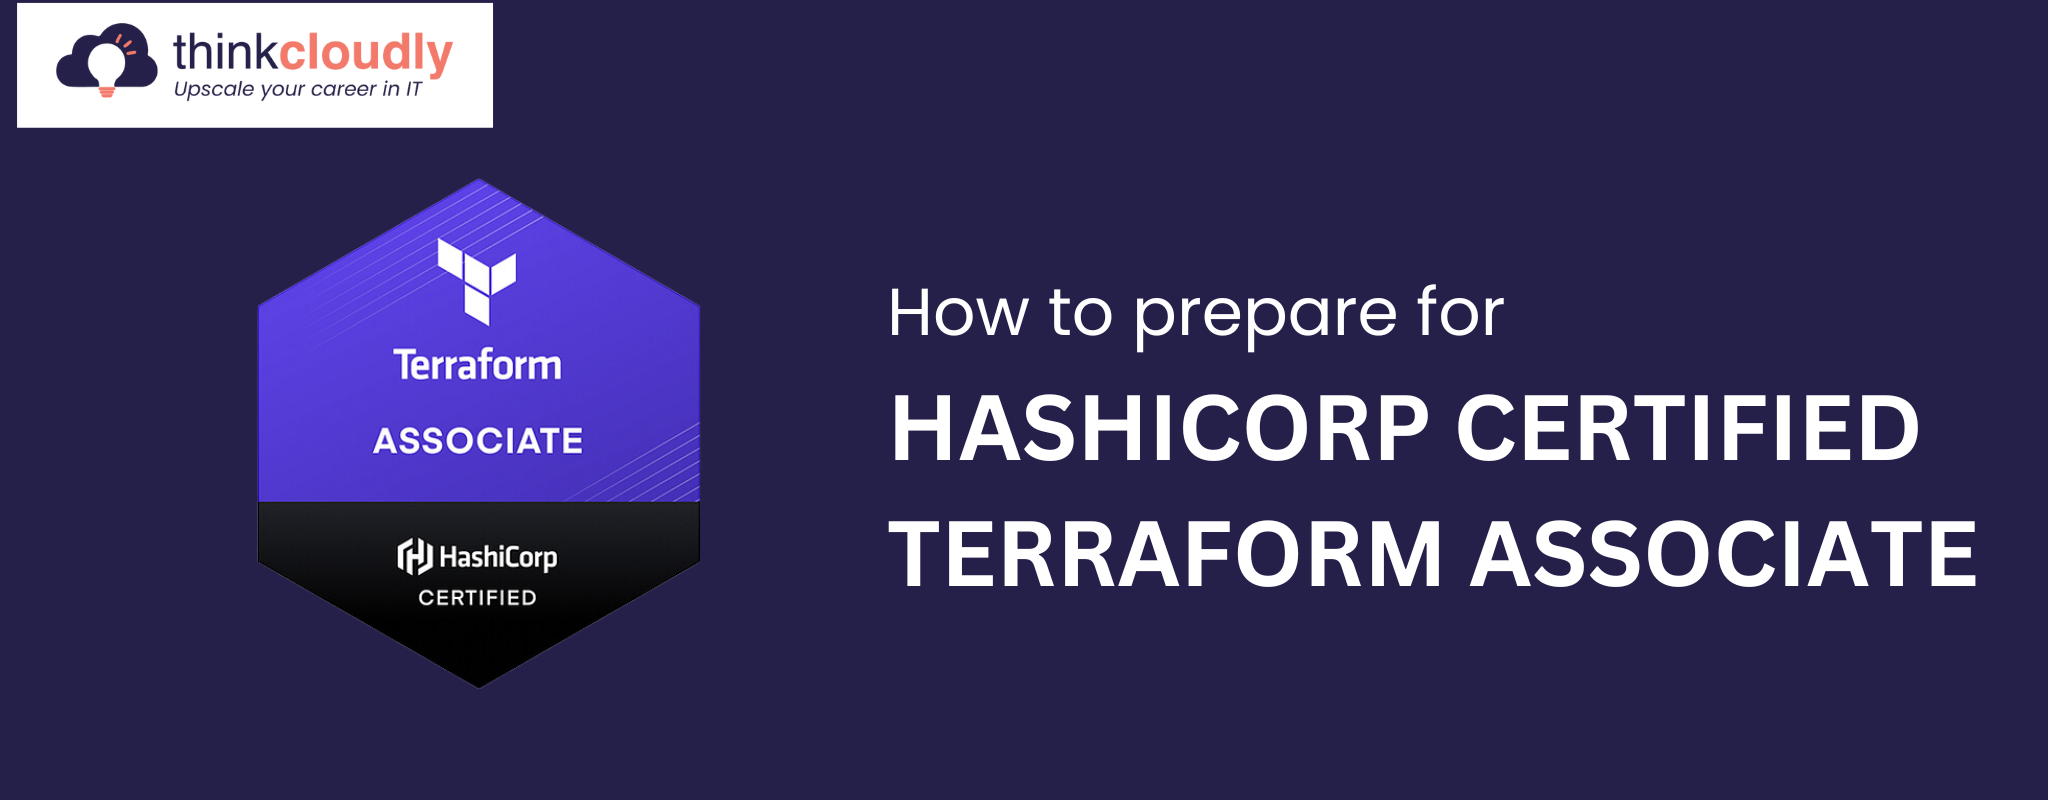 Hashicorp-Certified-Terraform-Associate-Study-Guide_Think-Cloudly